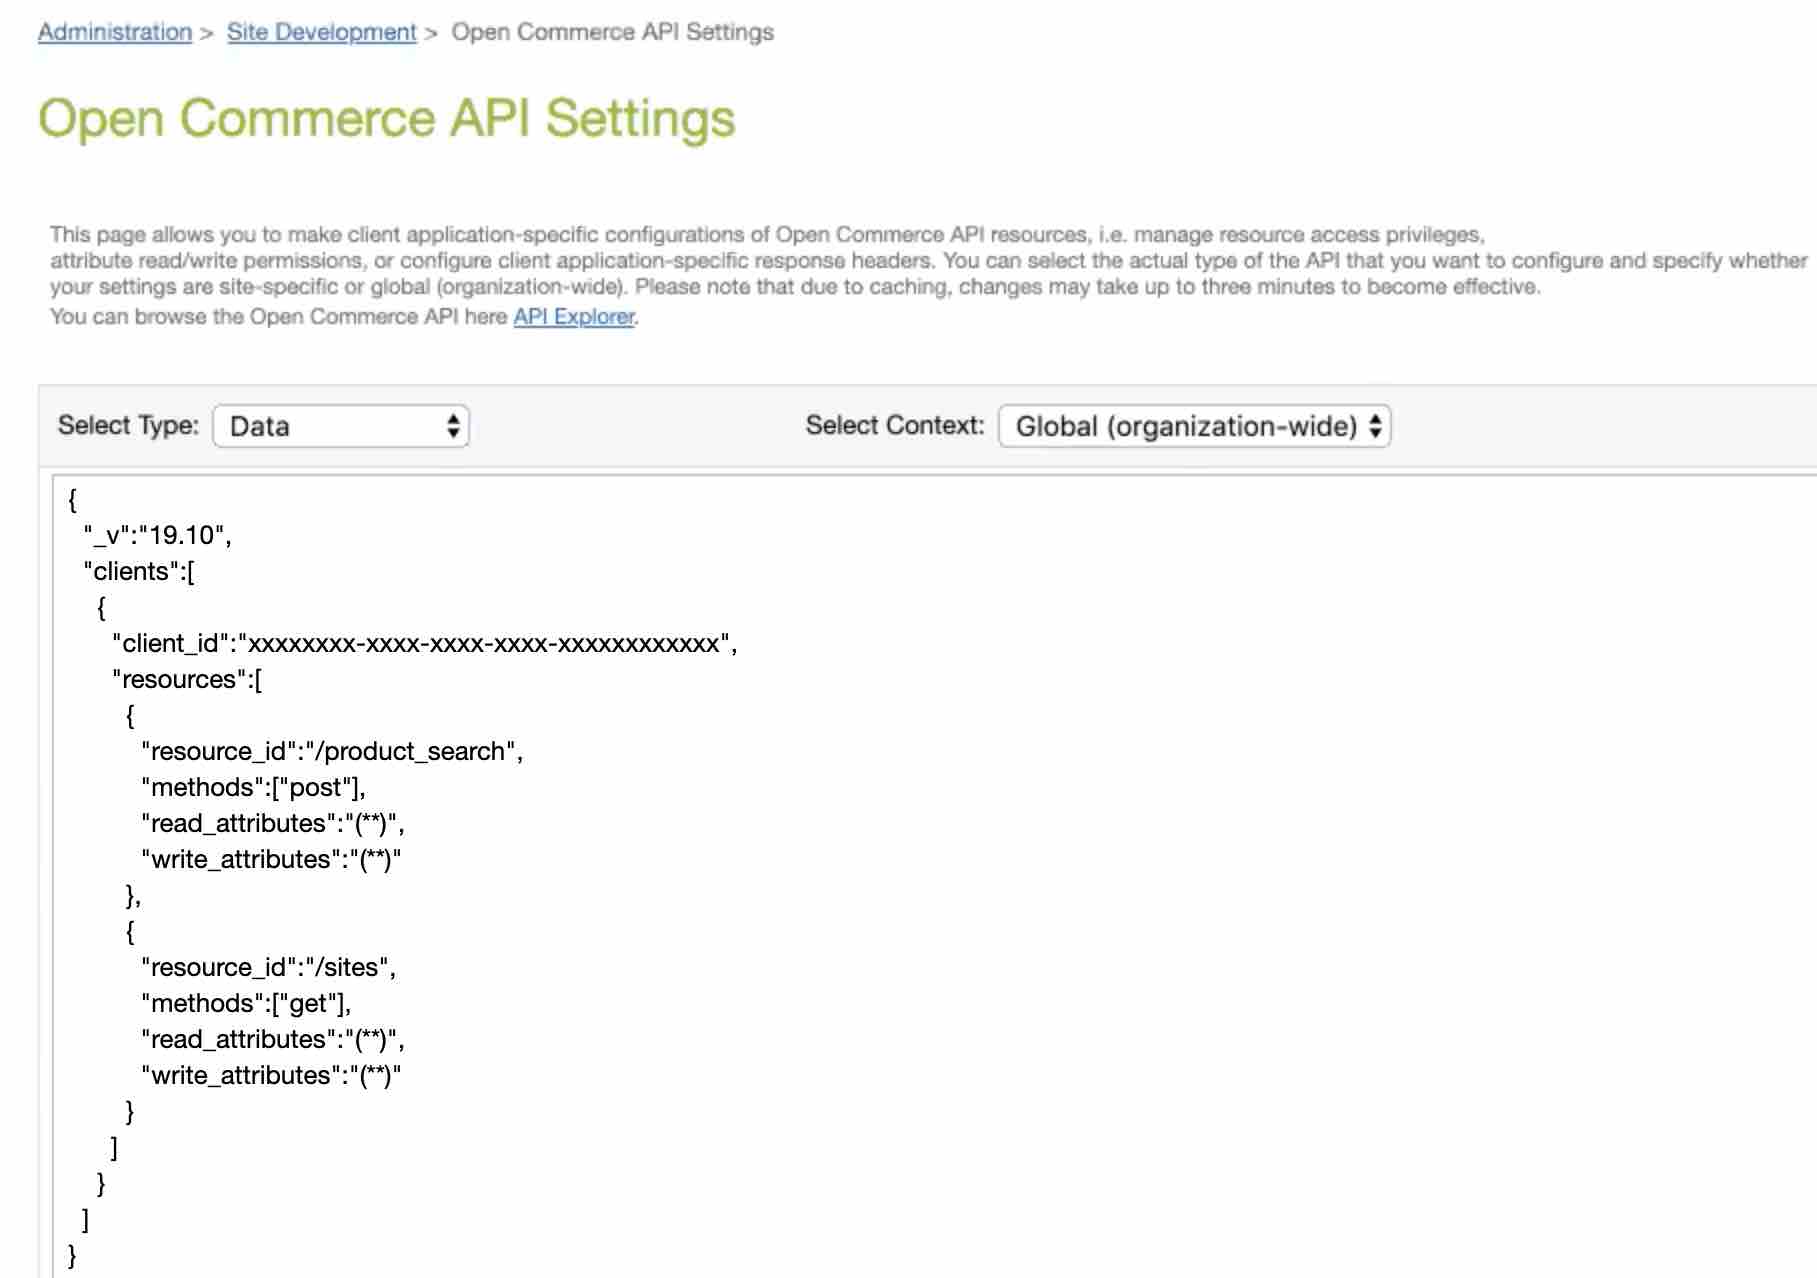 Open Commerce API Settings with Data type selected